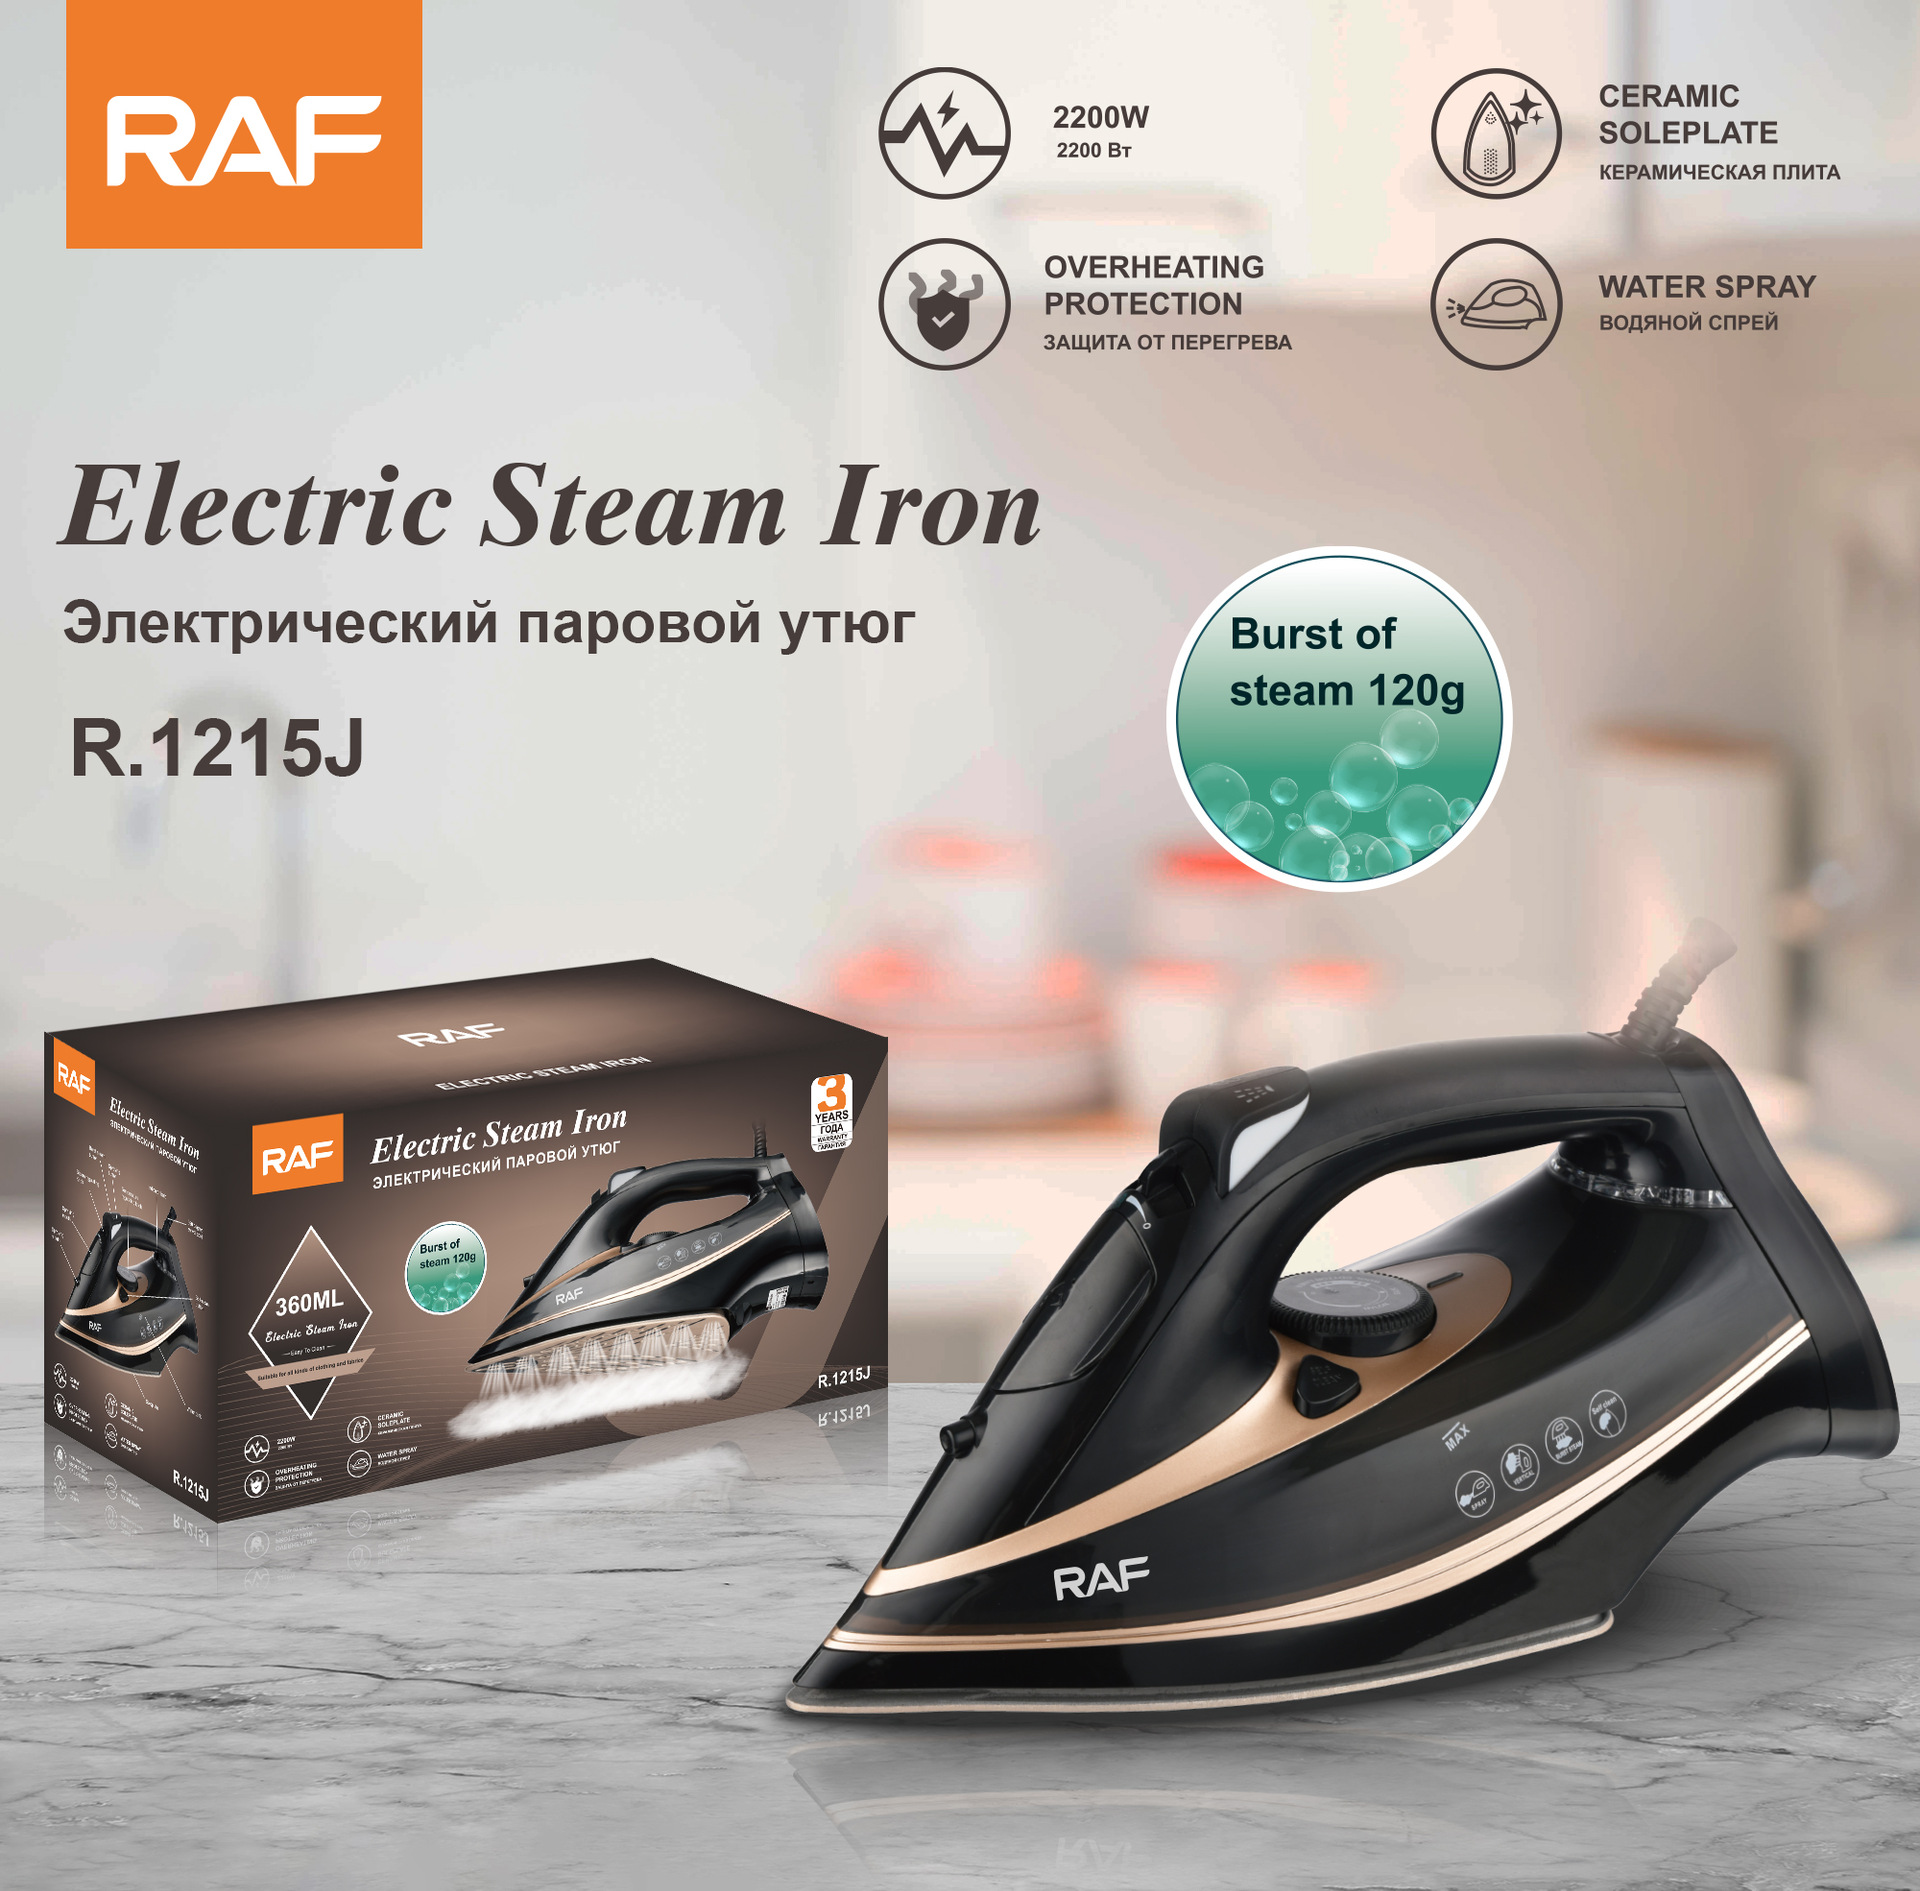 RAF R.1215 Electric Iron with 3 Temperature Adjustment Gears and 2600W Power Coated Bottom for Smooth Ironing Experience and Mechanical Temperature Control for Precision Ironing